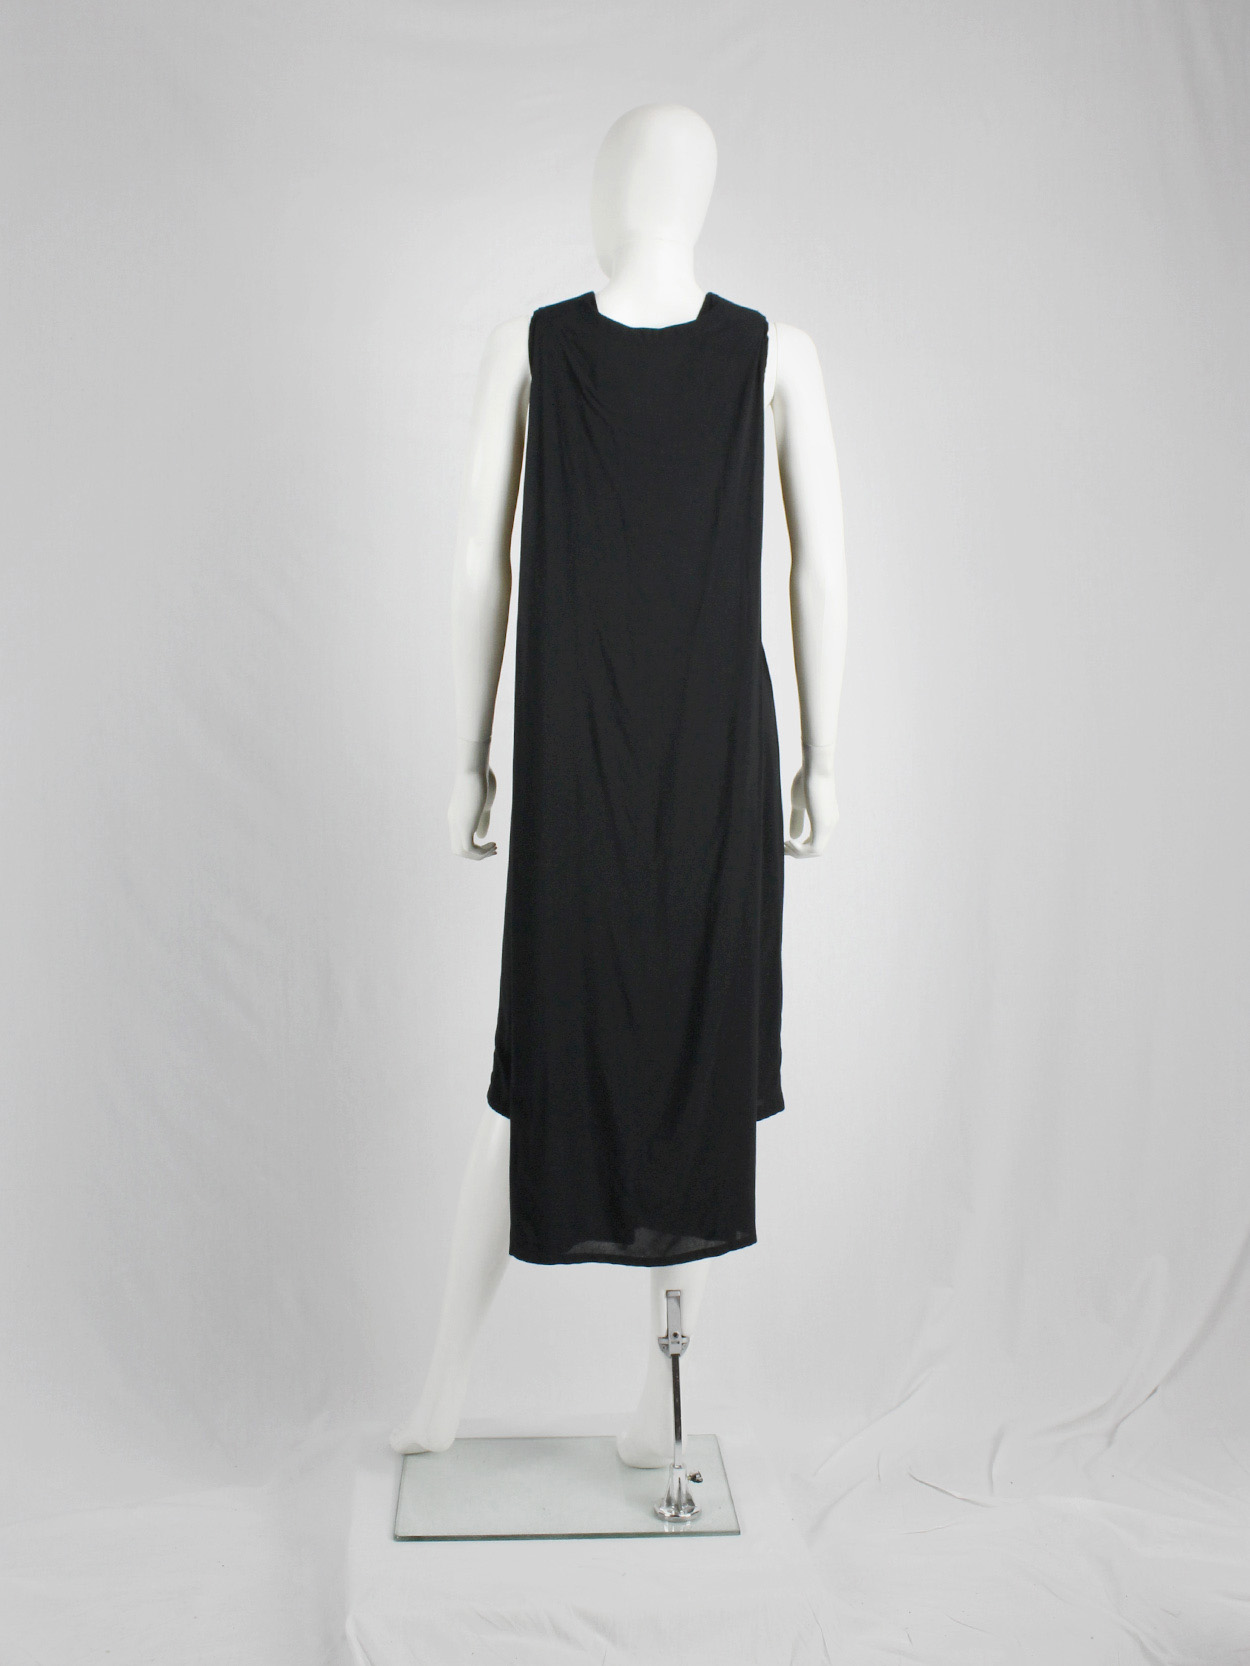 Ann Demeulemeester black dress with cape — spring 2013 - V A N II T A S